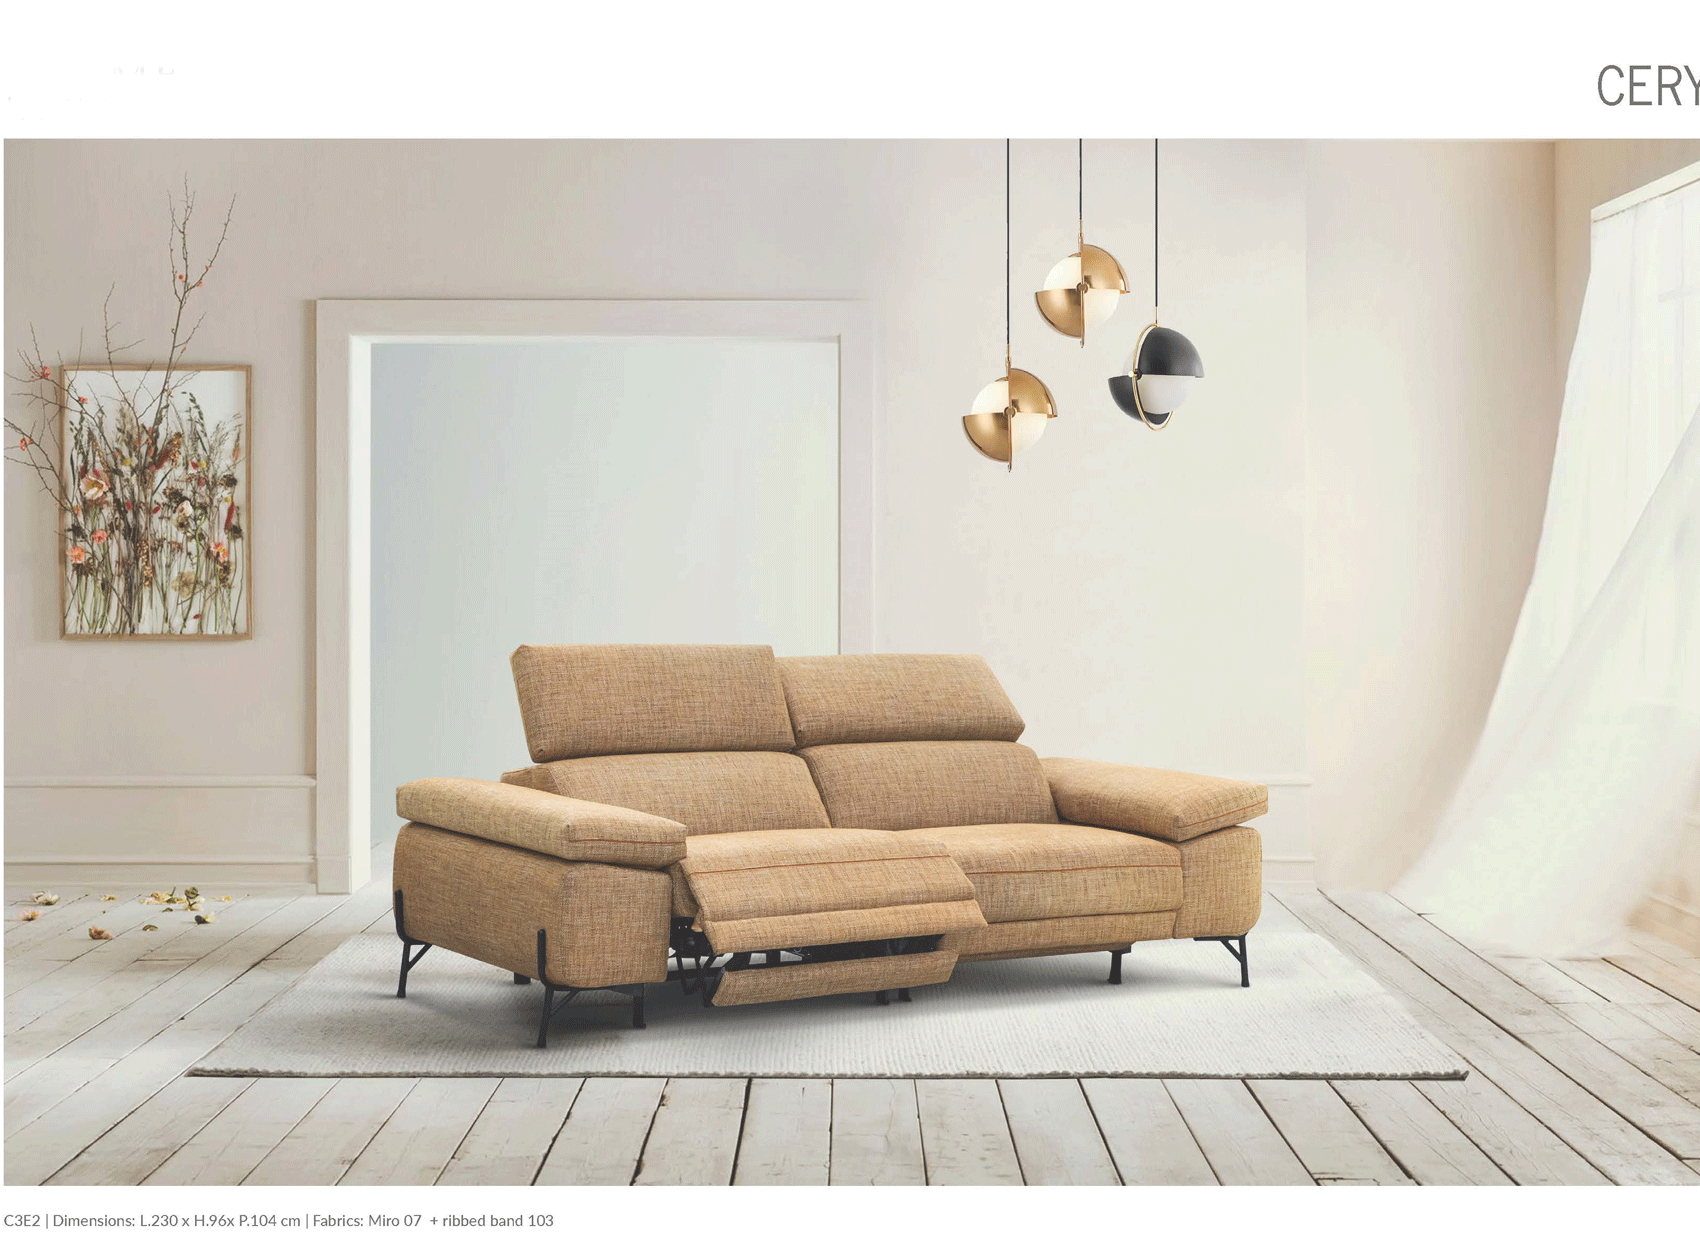 Clearance Living Room Cery Sofa w/recliner